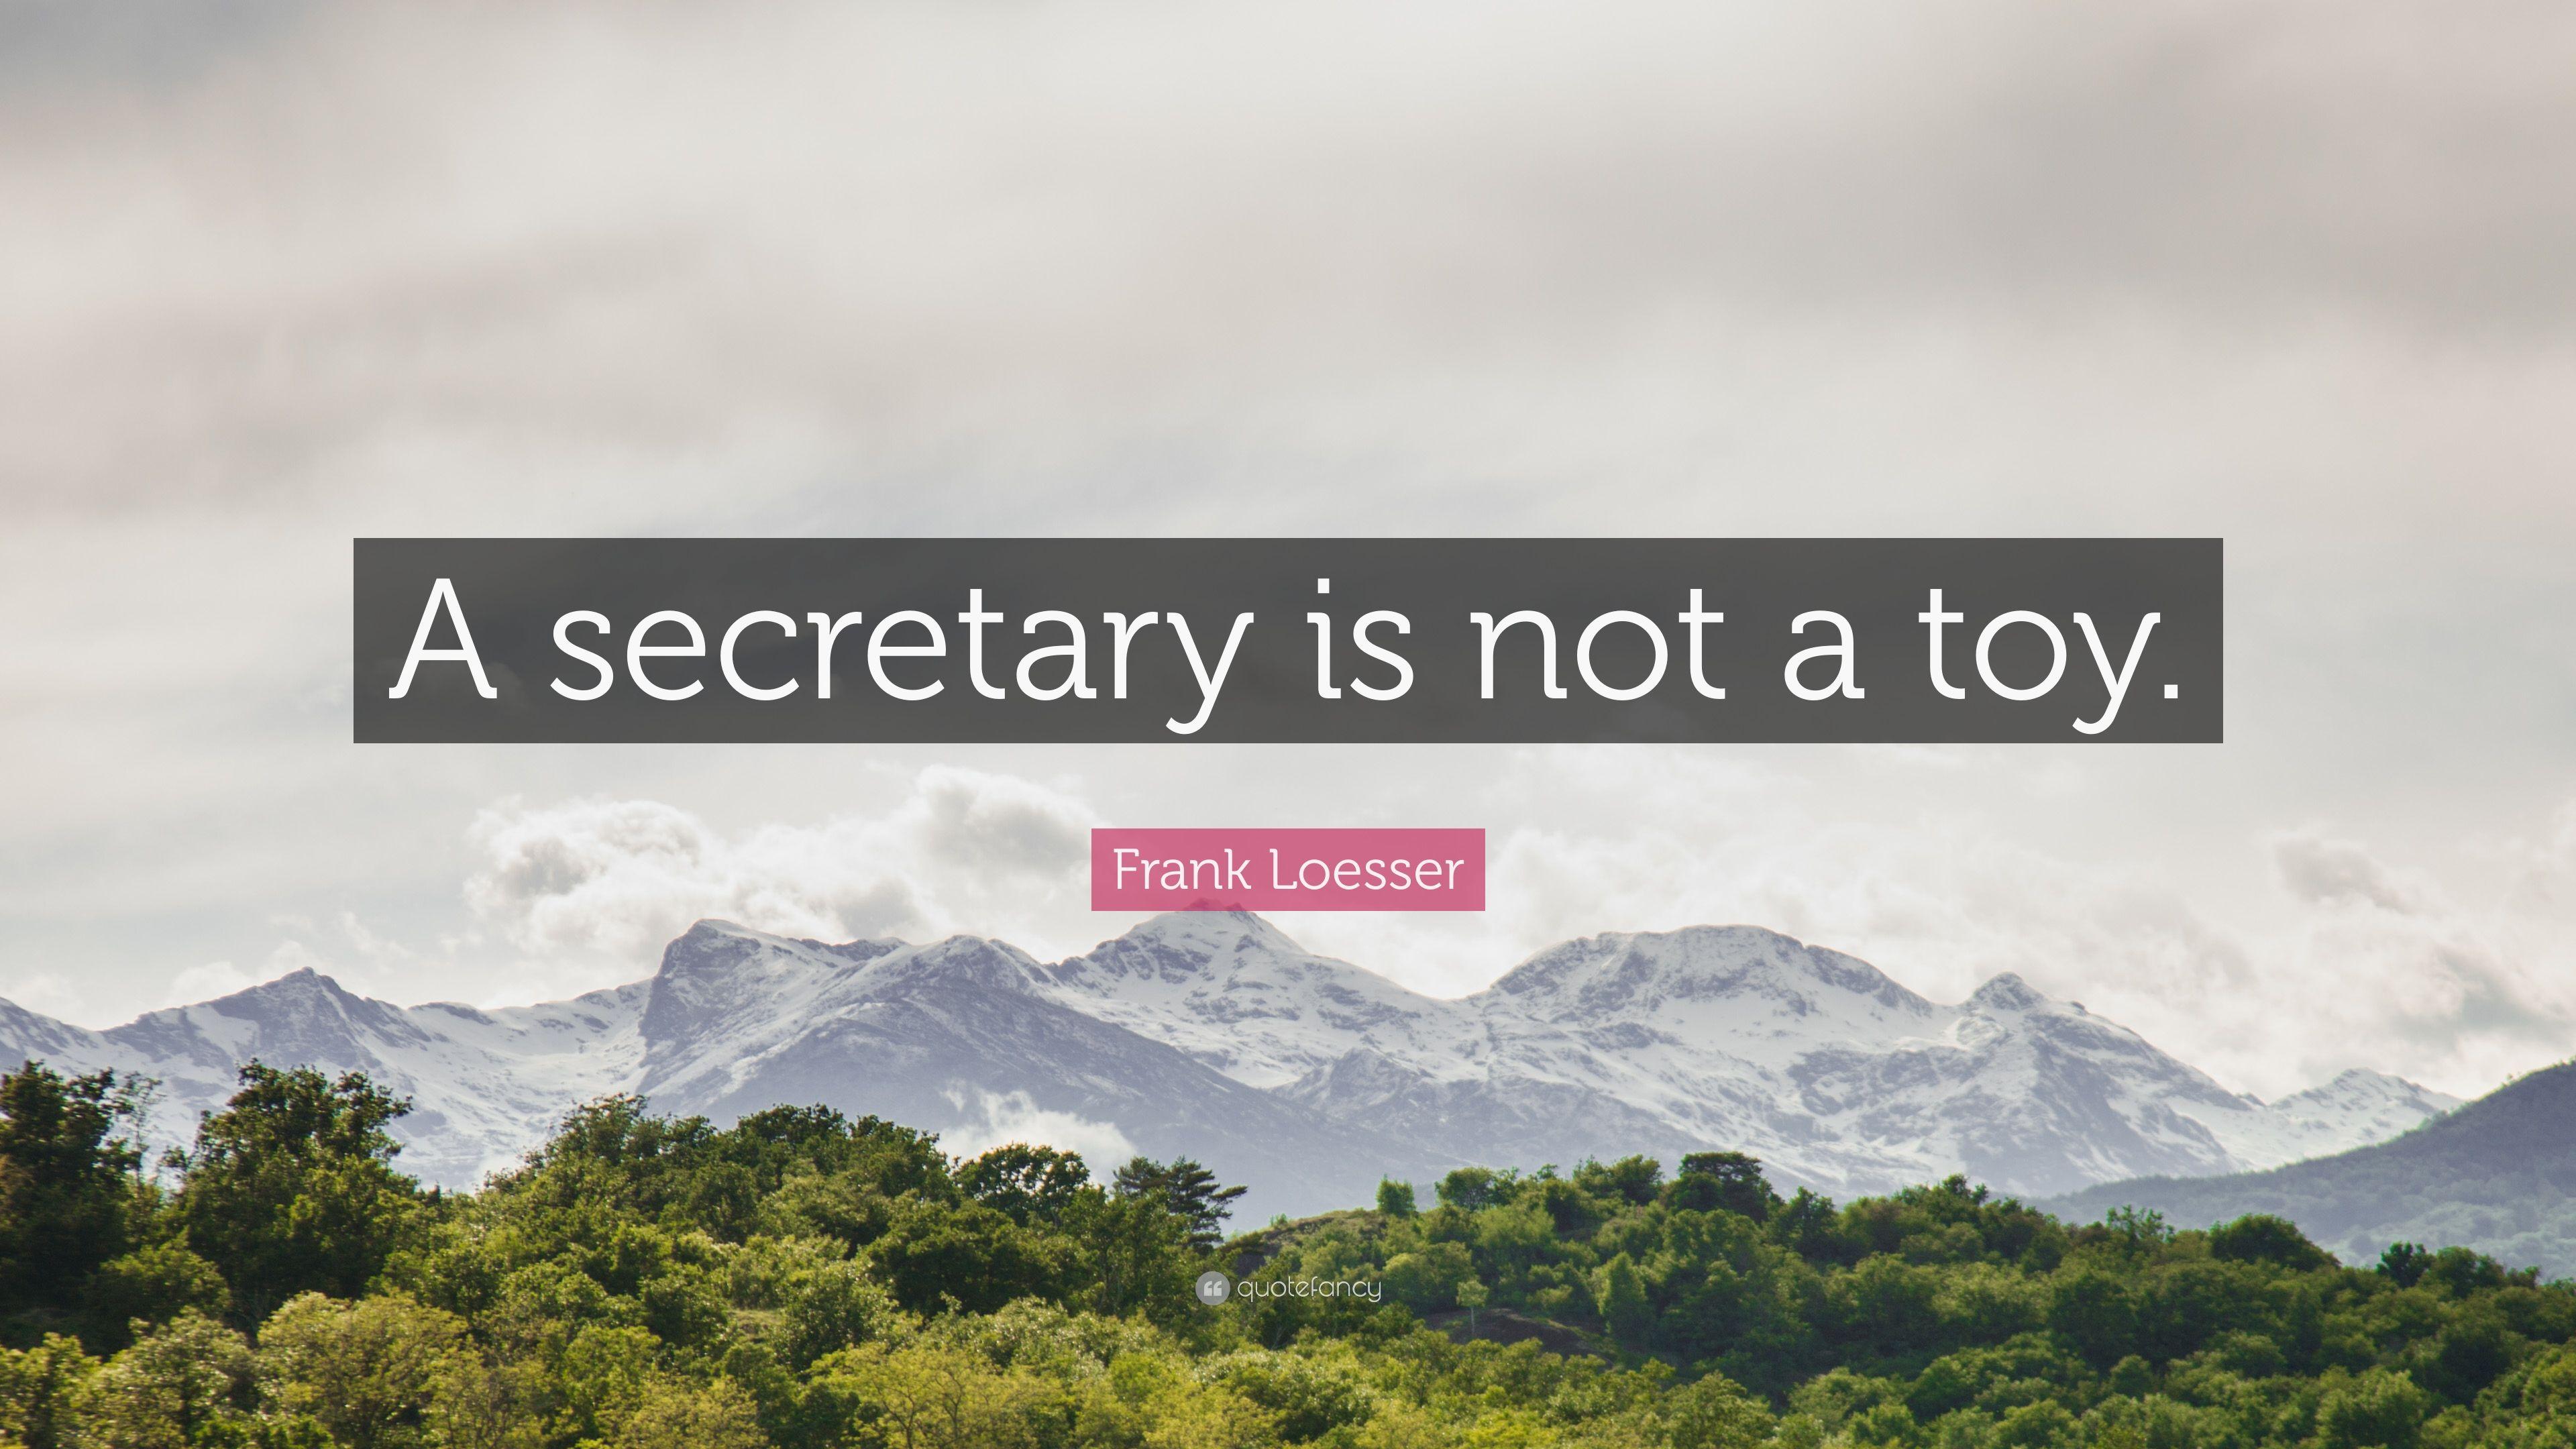 Frank Loesser Quote: “A secretary is not a toy.” 7 wallpaper